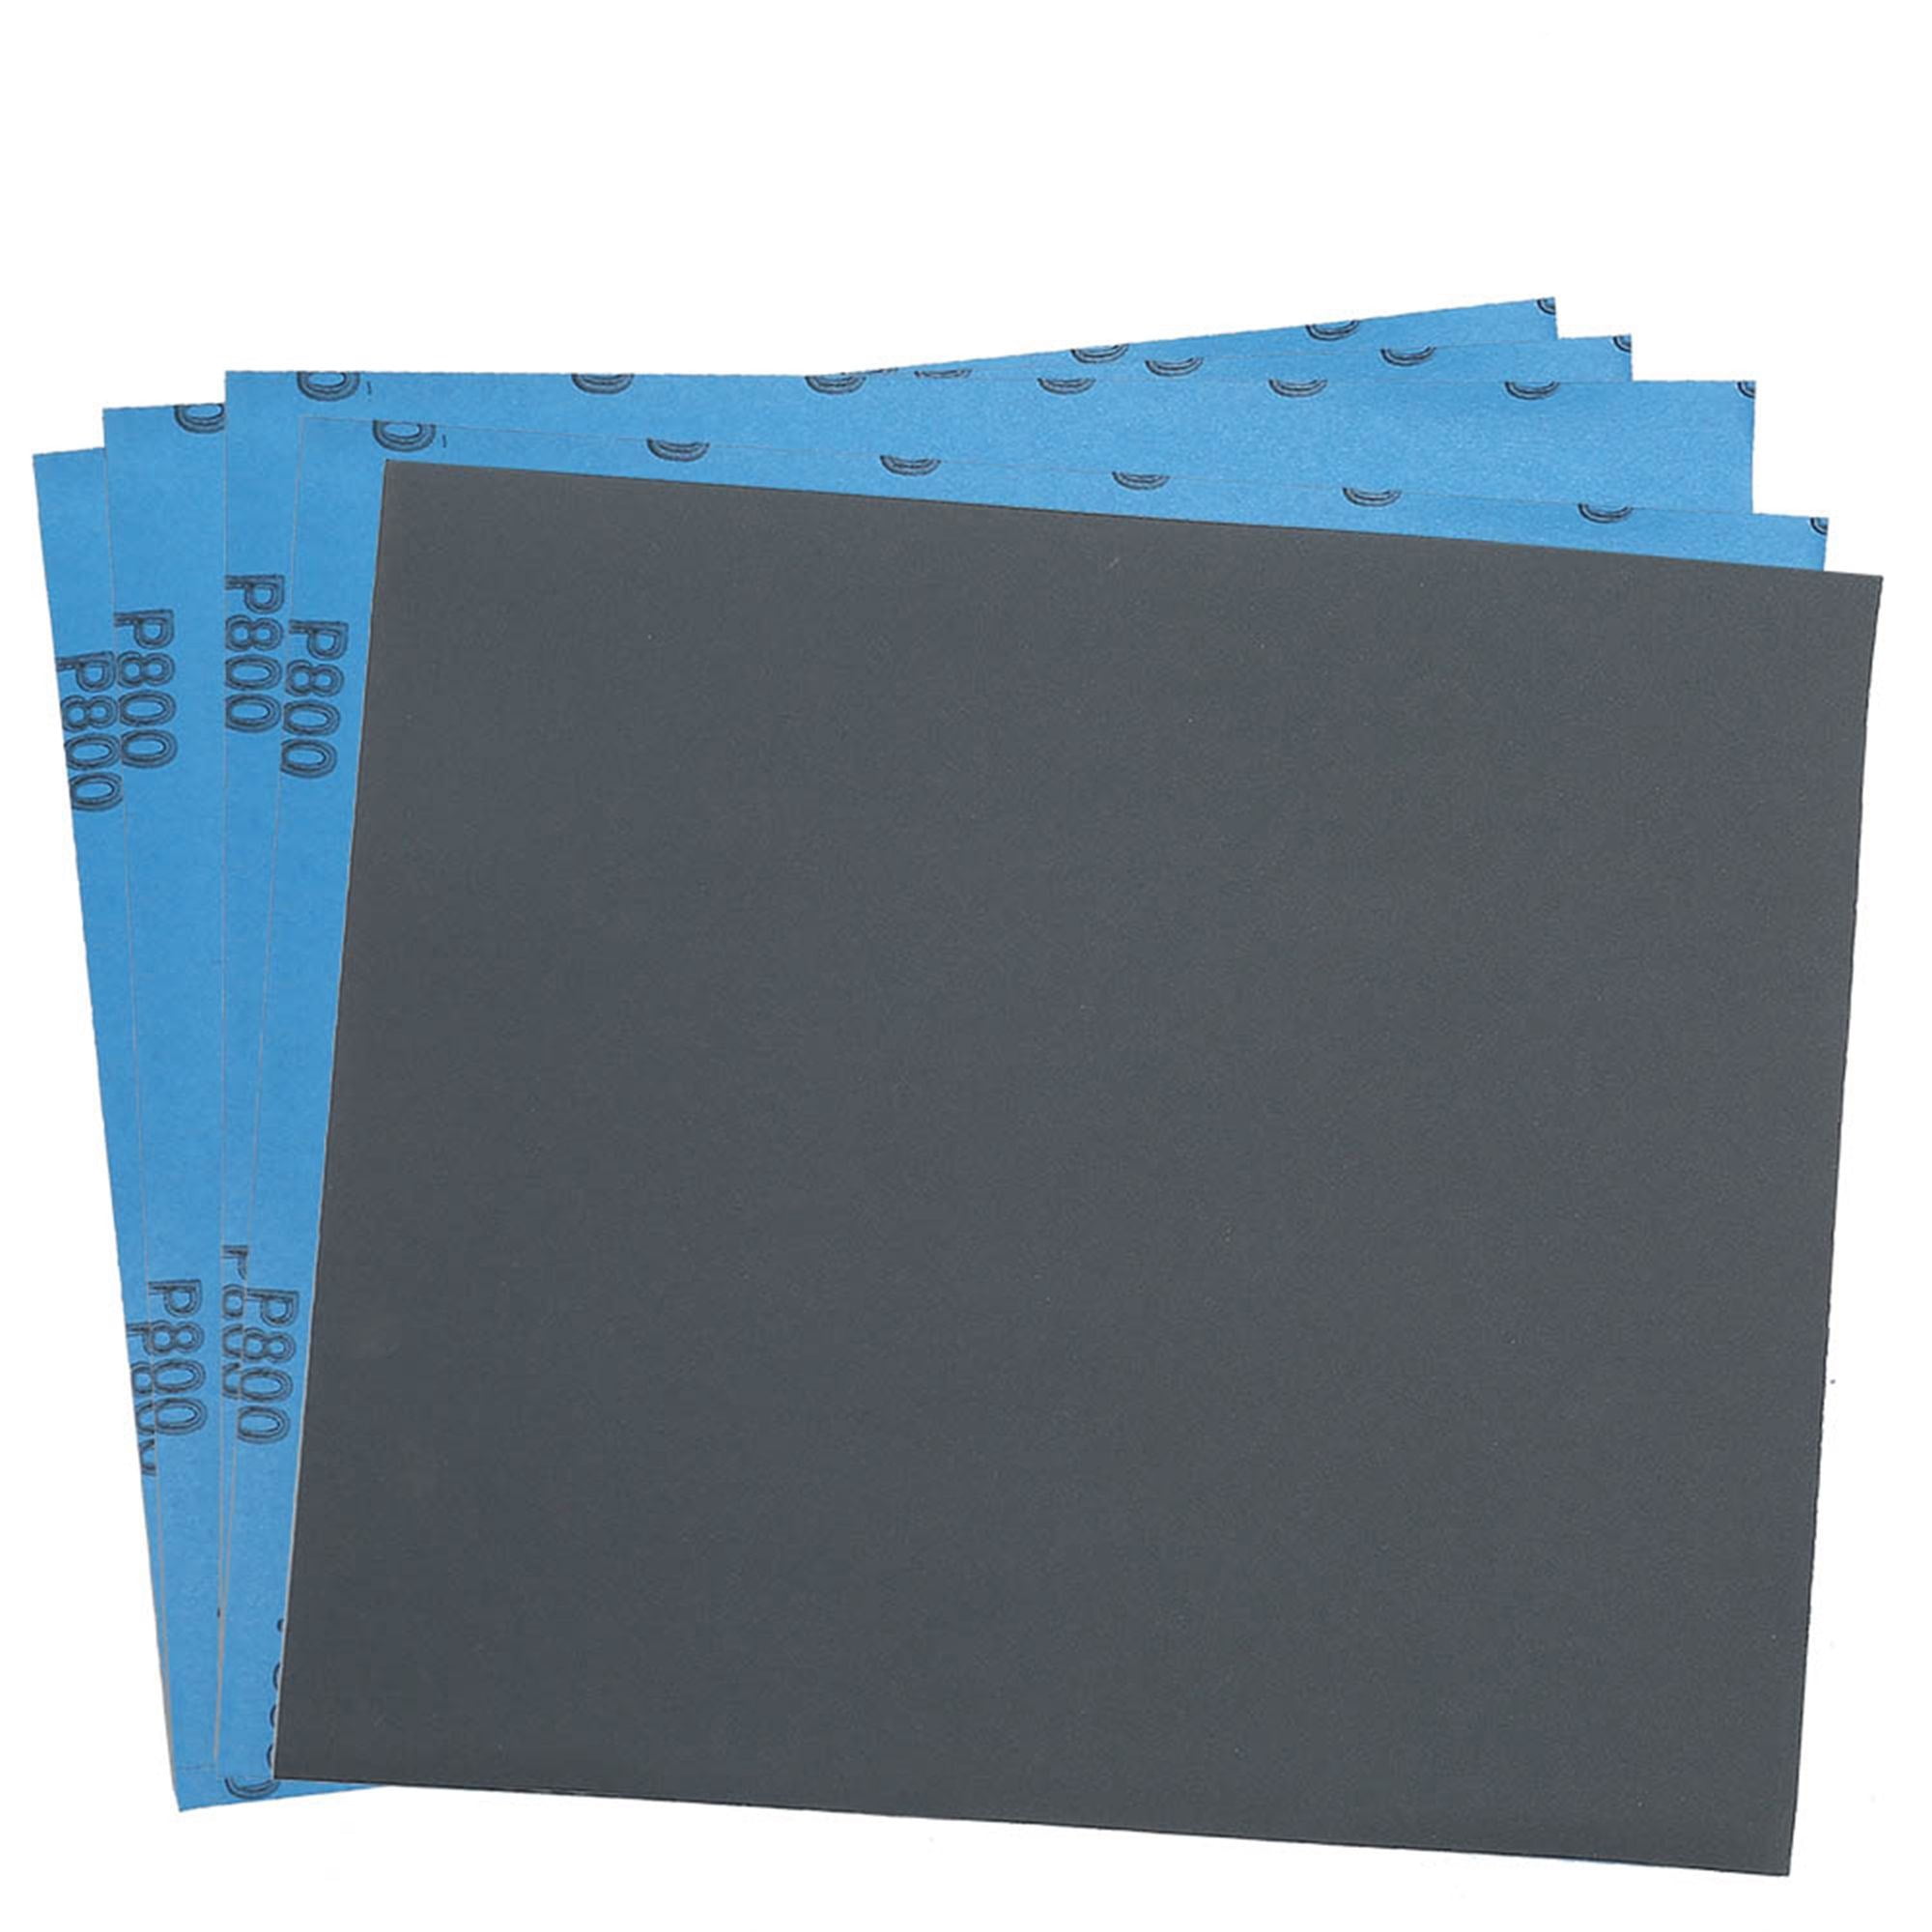 150 grit-50 Pack 9 X 11 Wet or Dry Waterproof Silicon Carbide Sandpaper Sheets